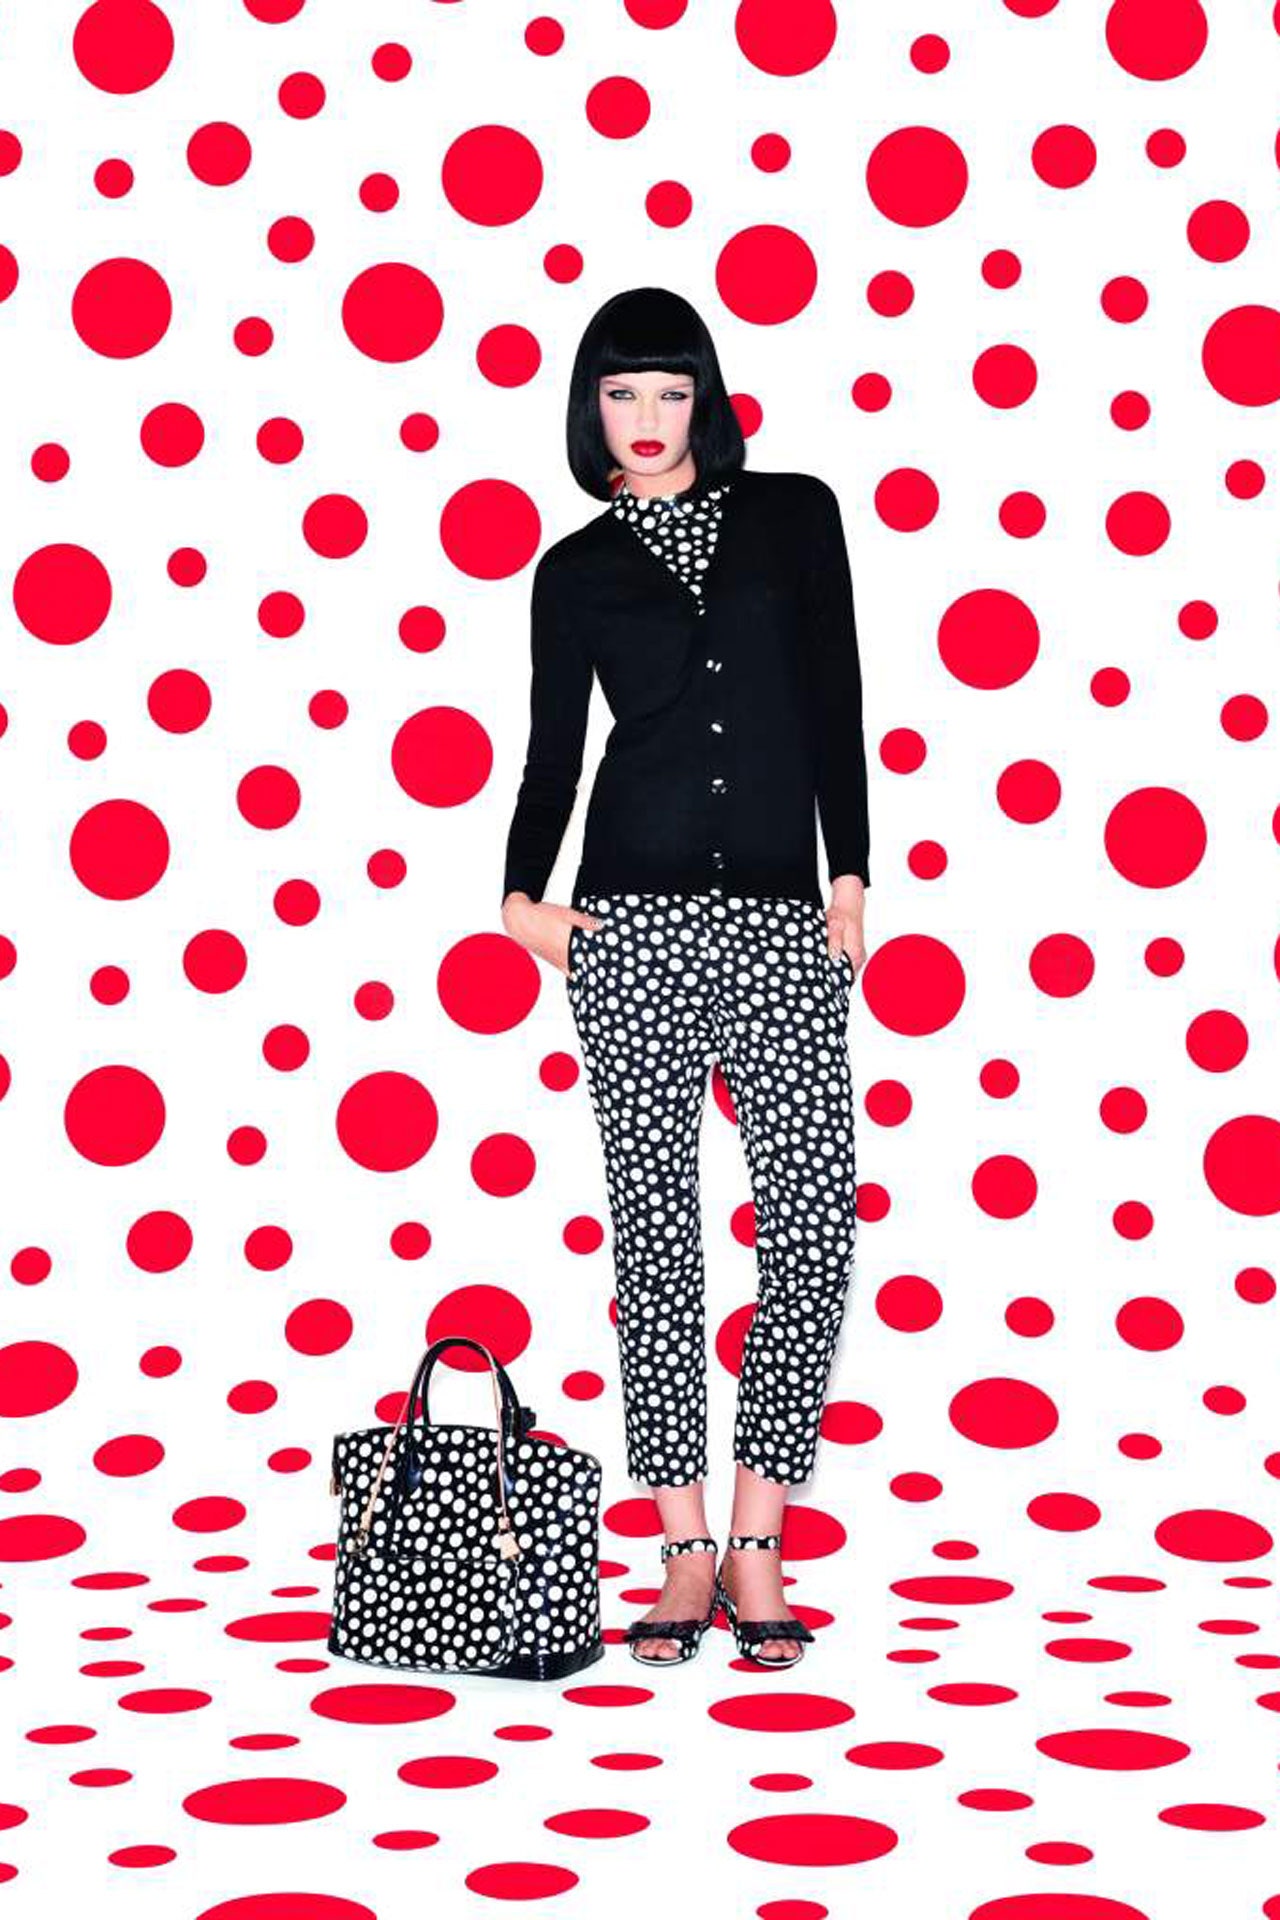 Fashion Briefing: Louis Vuitton x Yayoi Kusama and the art of the